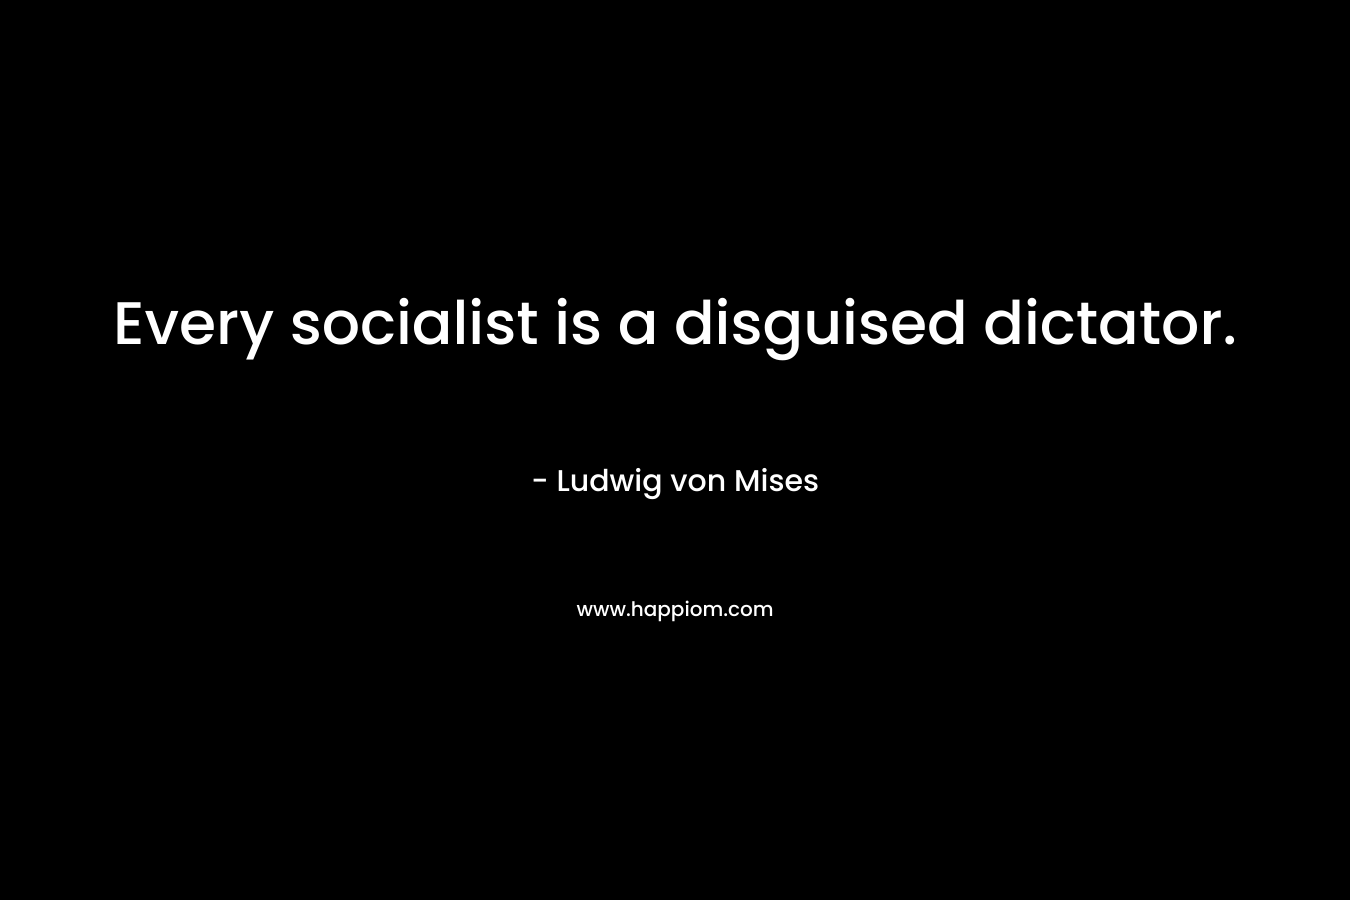 Every socialist is a disguised dictator. – Ludwig von Mises